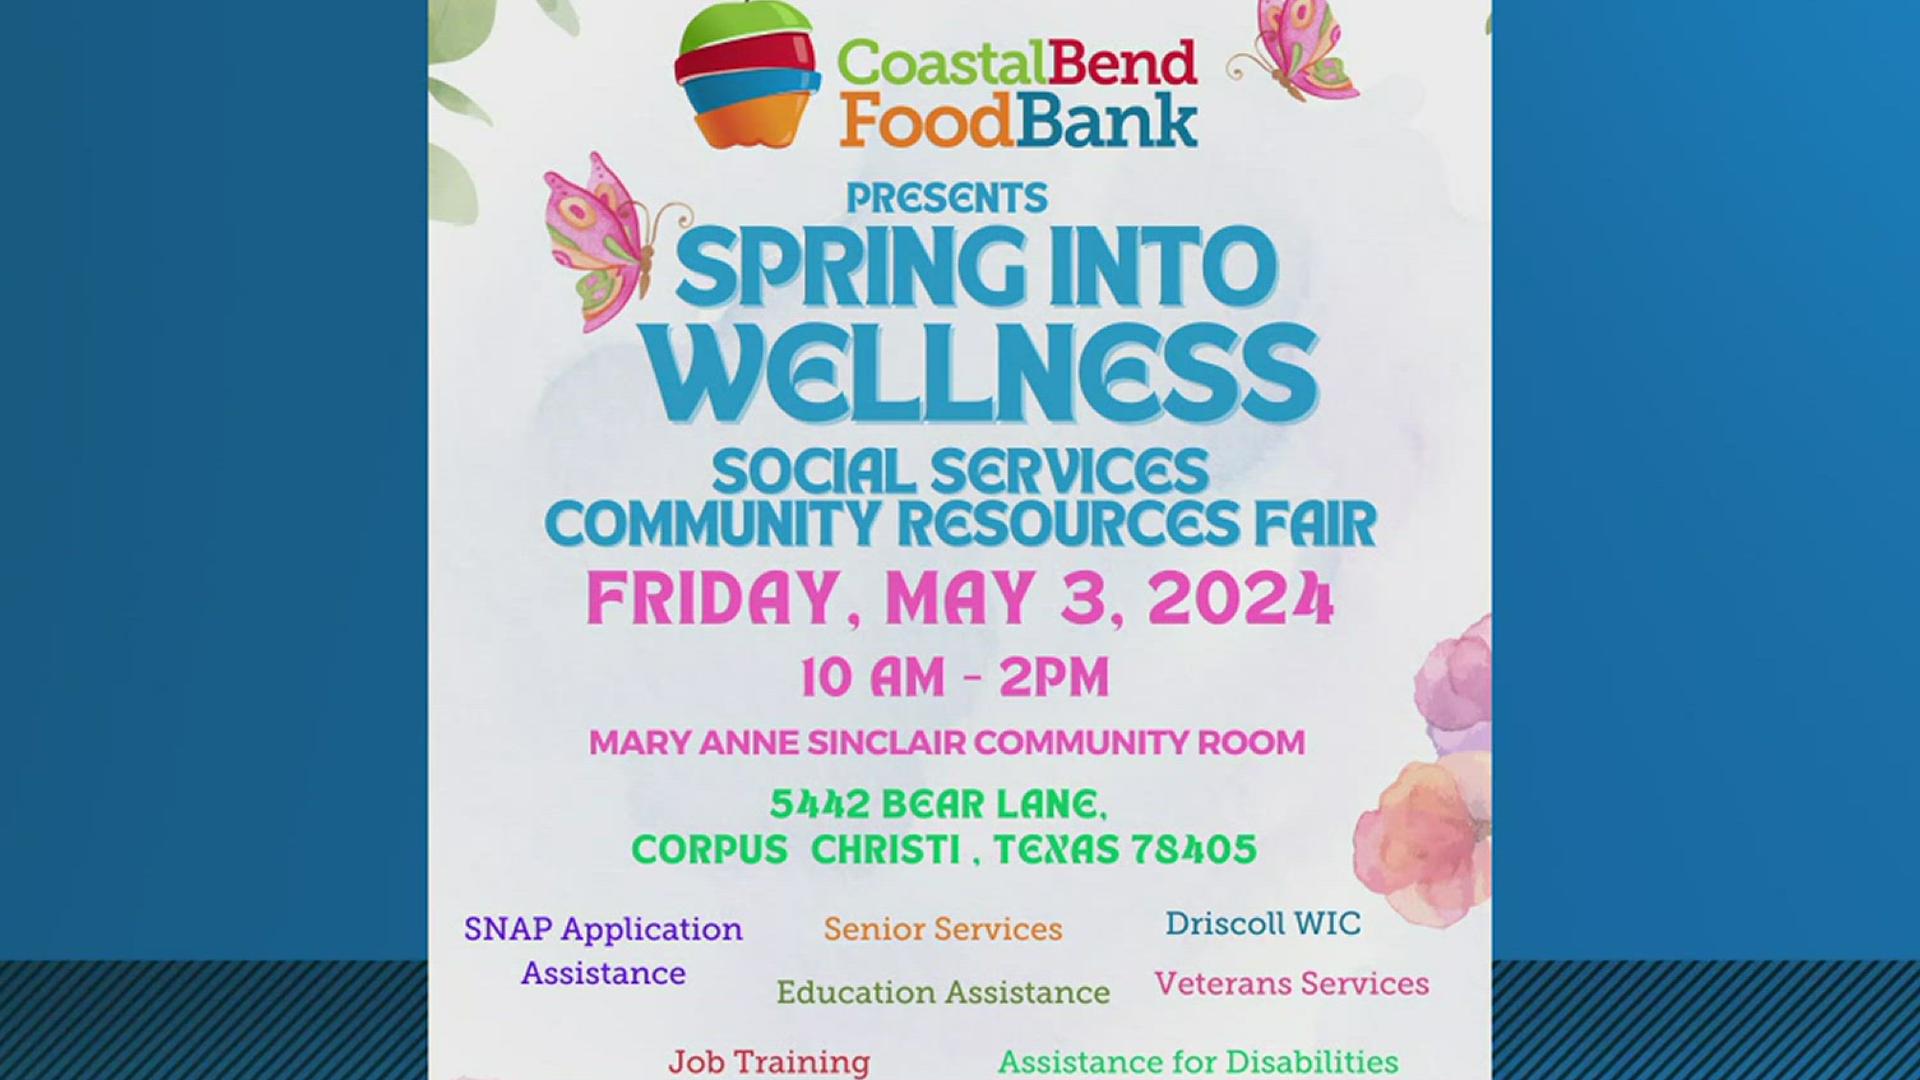 The 'Spring into Wellness' resource fair will be from 10 a.m. to 2 p.m. at the Mary Anne Sinclair Community Room in the food bank facility on Bear Lane.